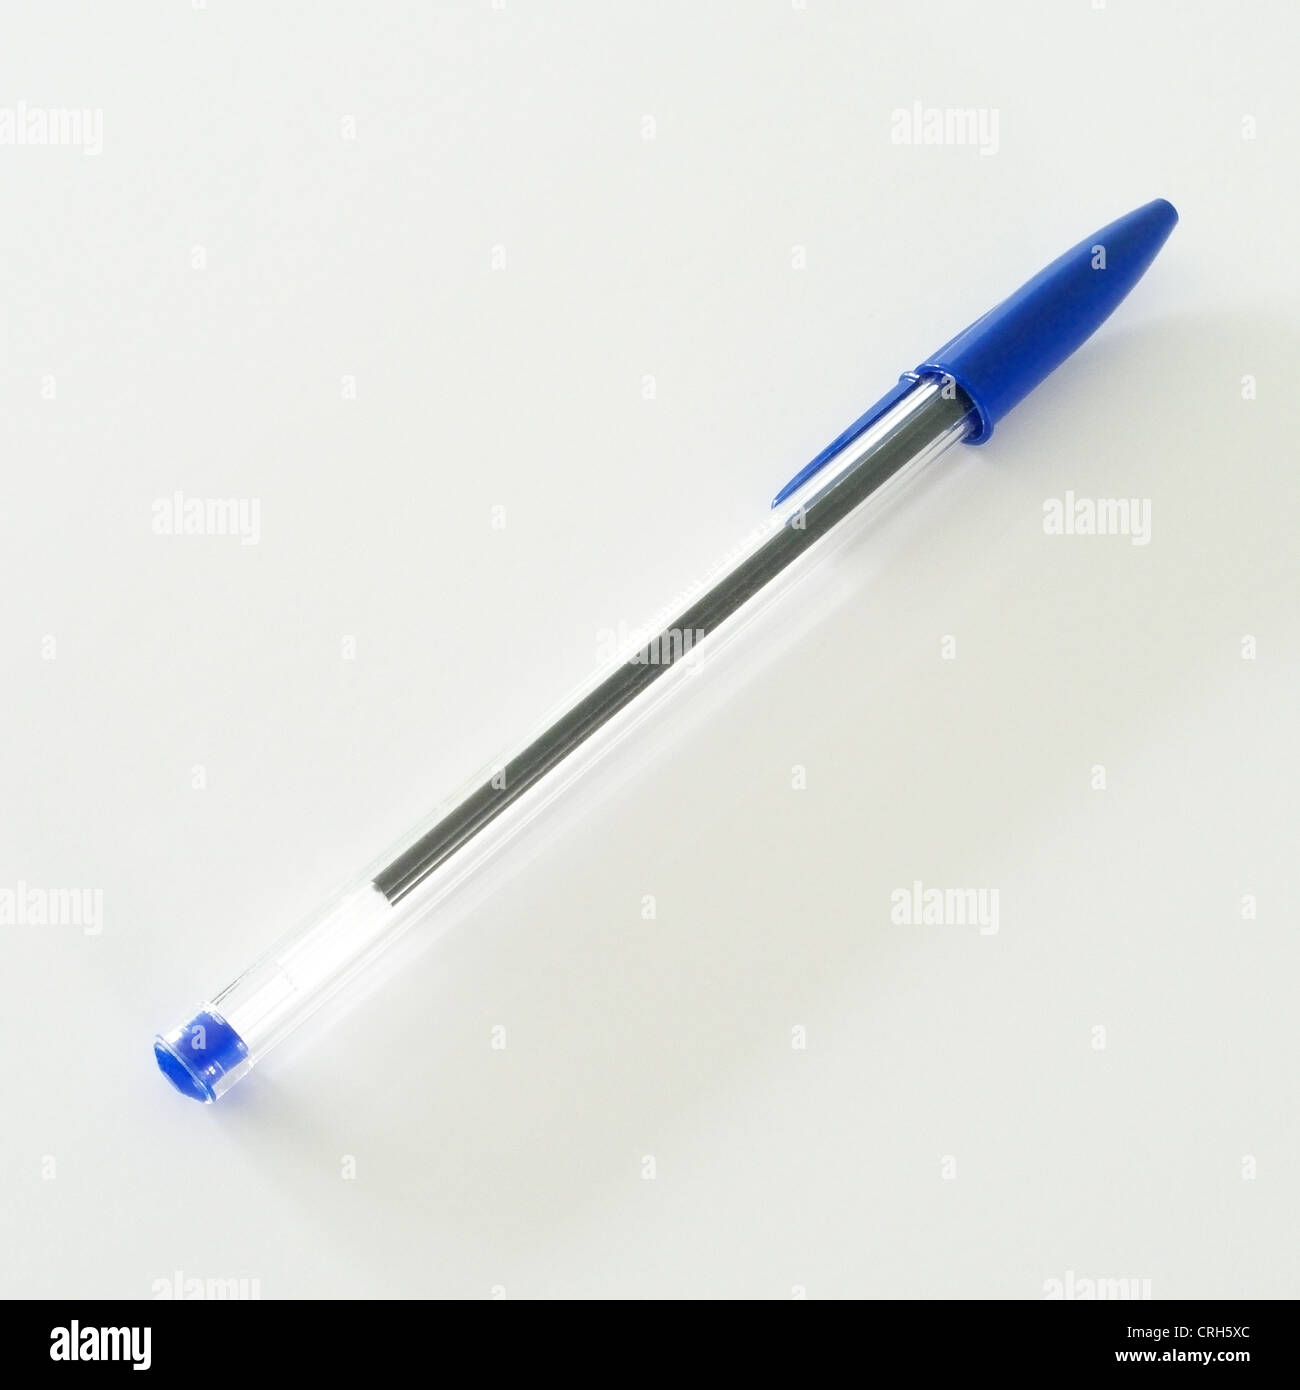 Bic Ballpoint Pen High Resolution Stock Photography and Images - Alamy